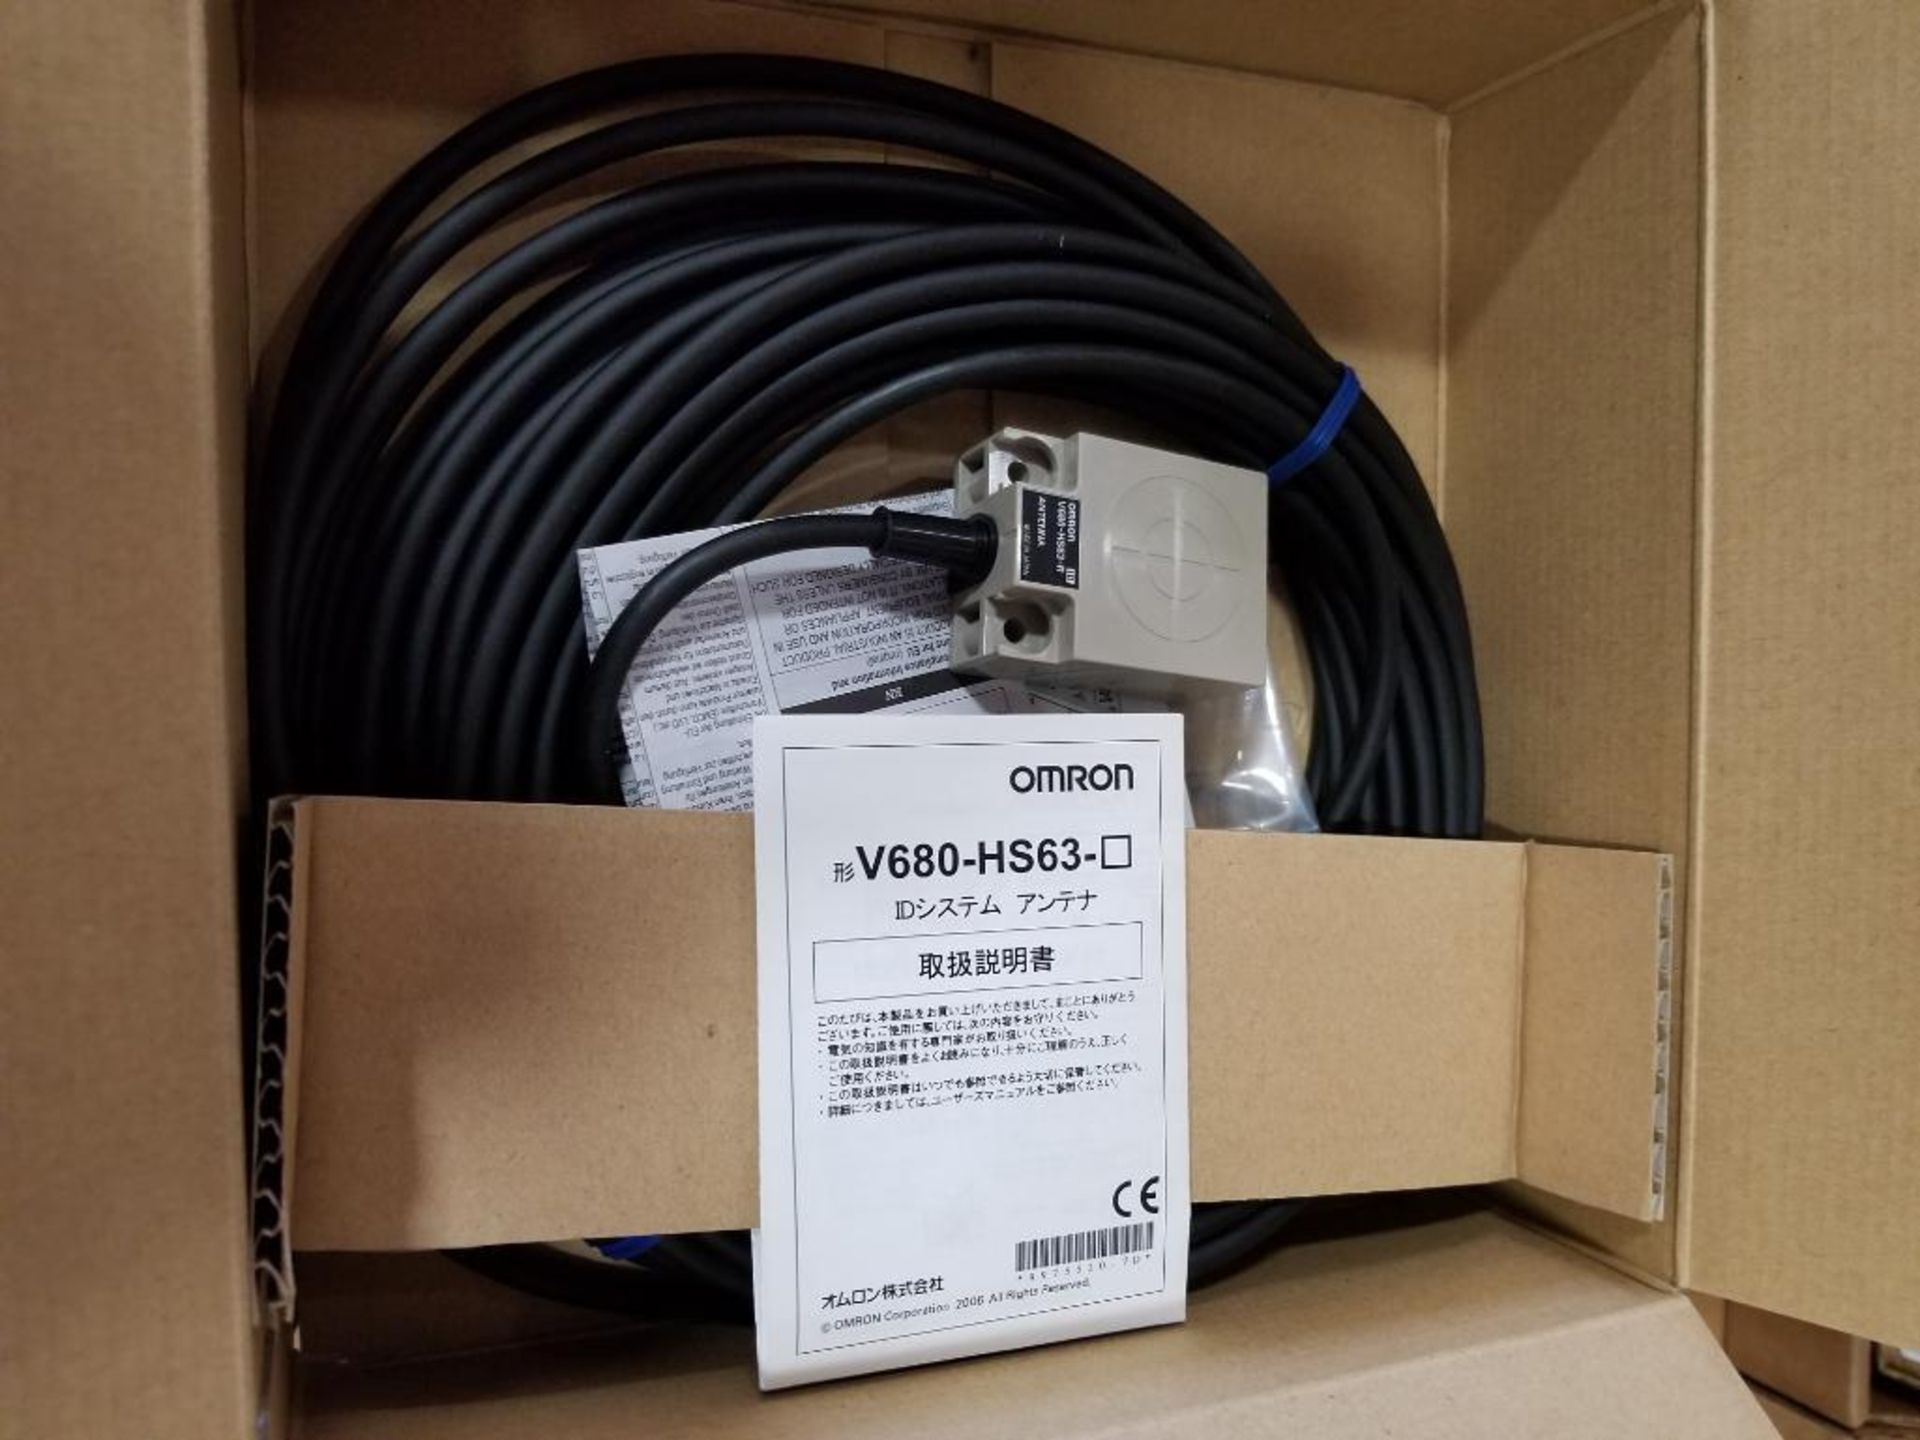 Omron system antenna. Model V680-HS63-R 12.5M. New in box. - Image 3 of 4